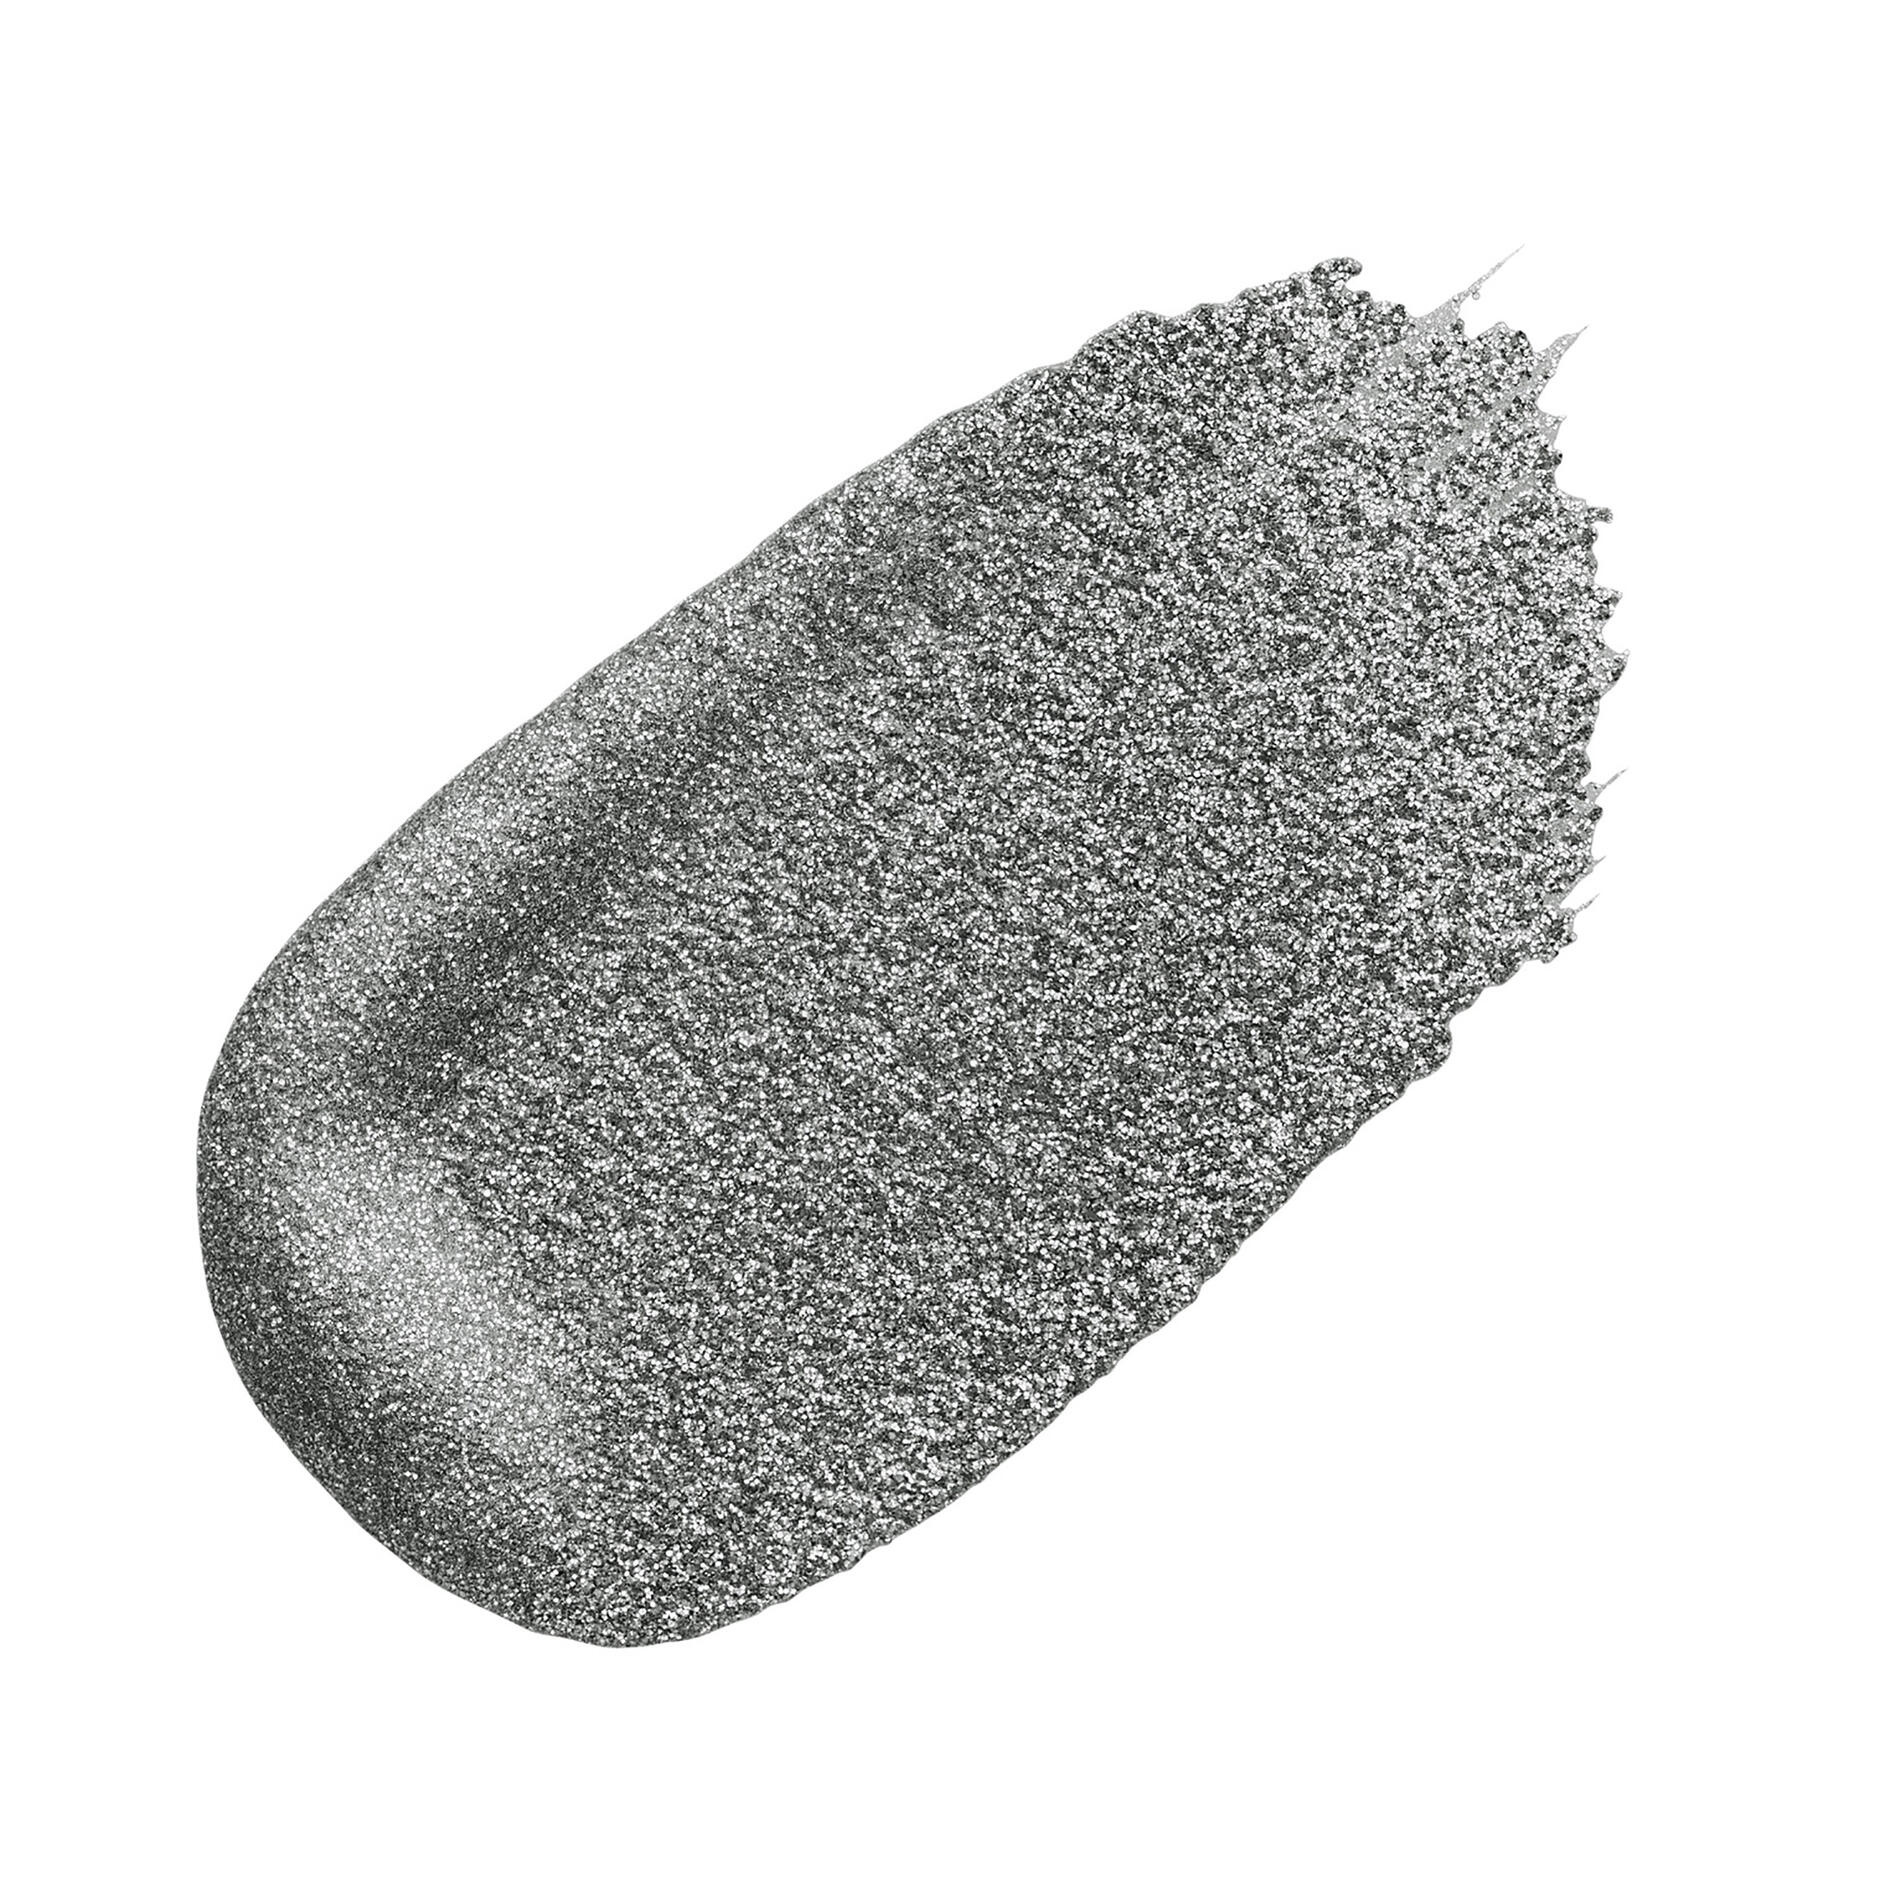 a smear or dollop of silver glitter liquid eye shadow showing the texture of the product